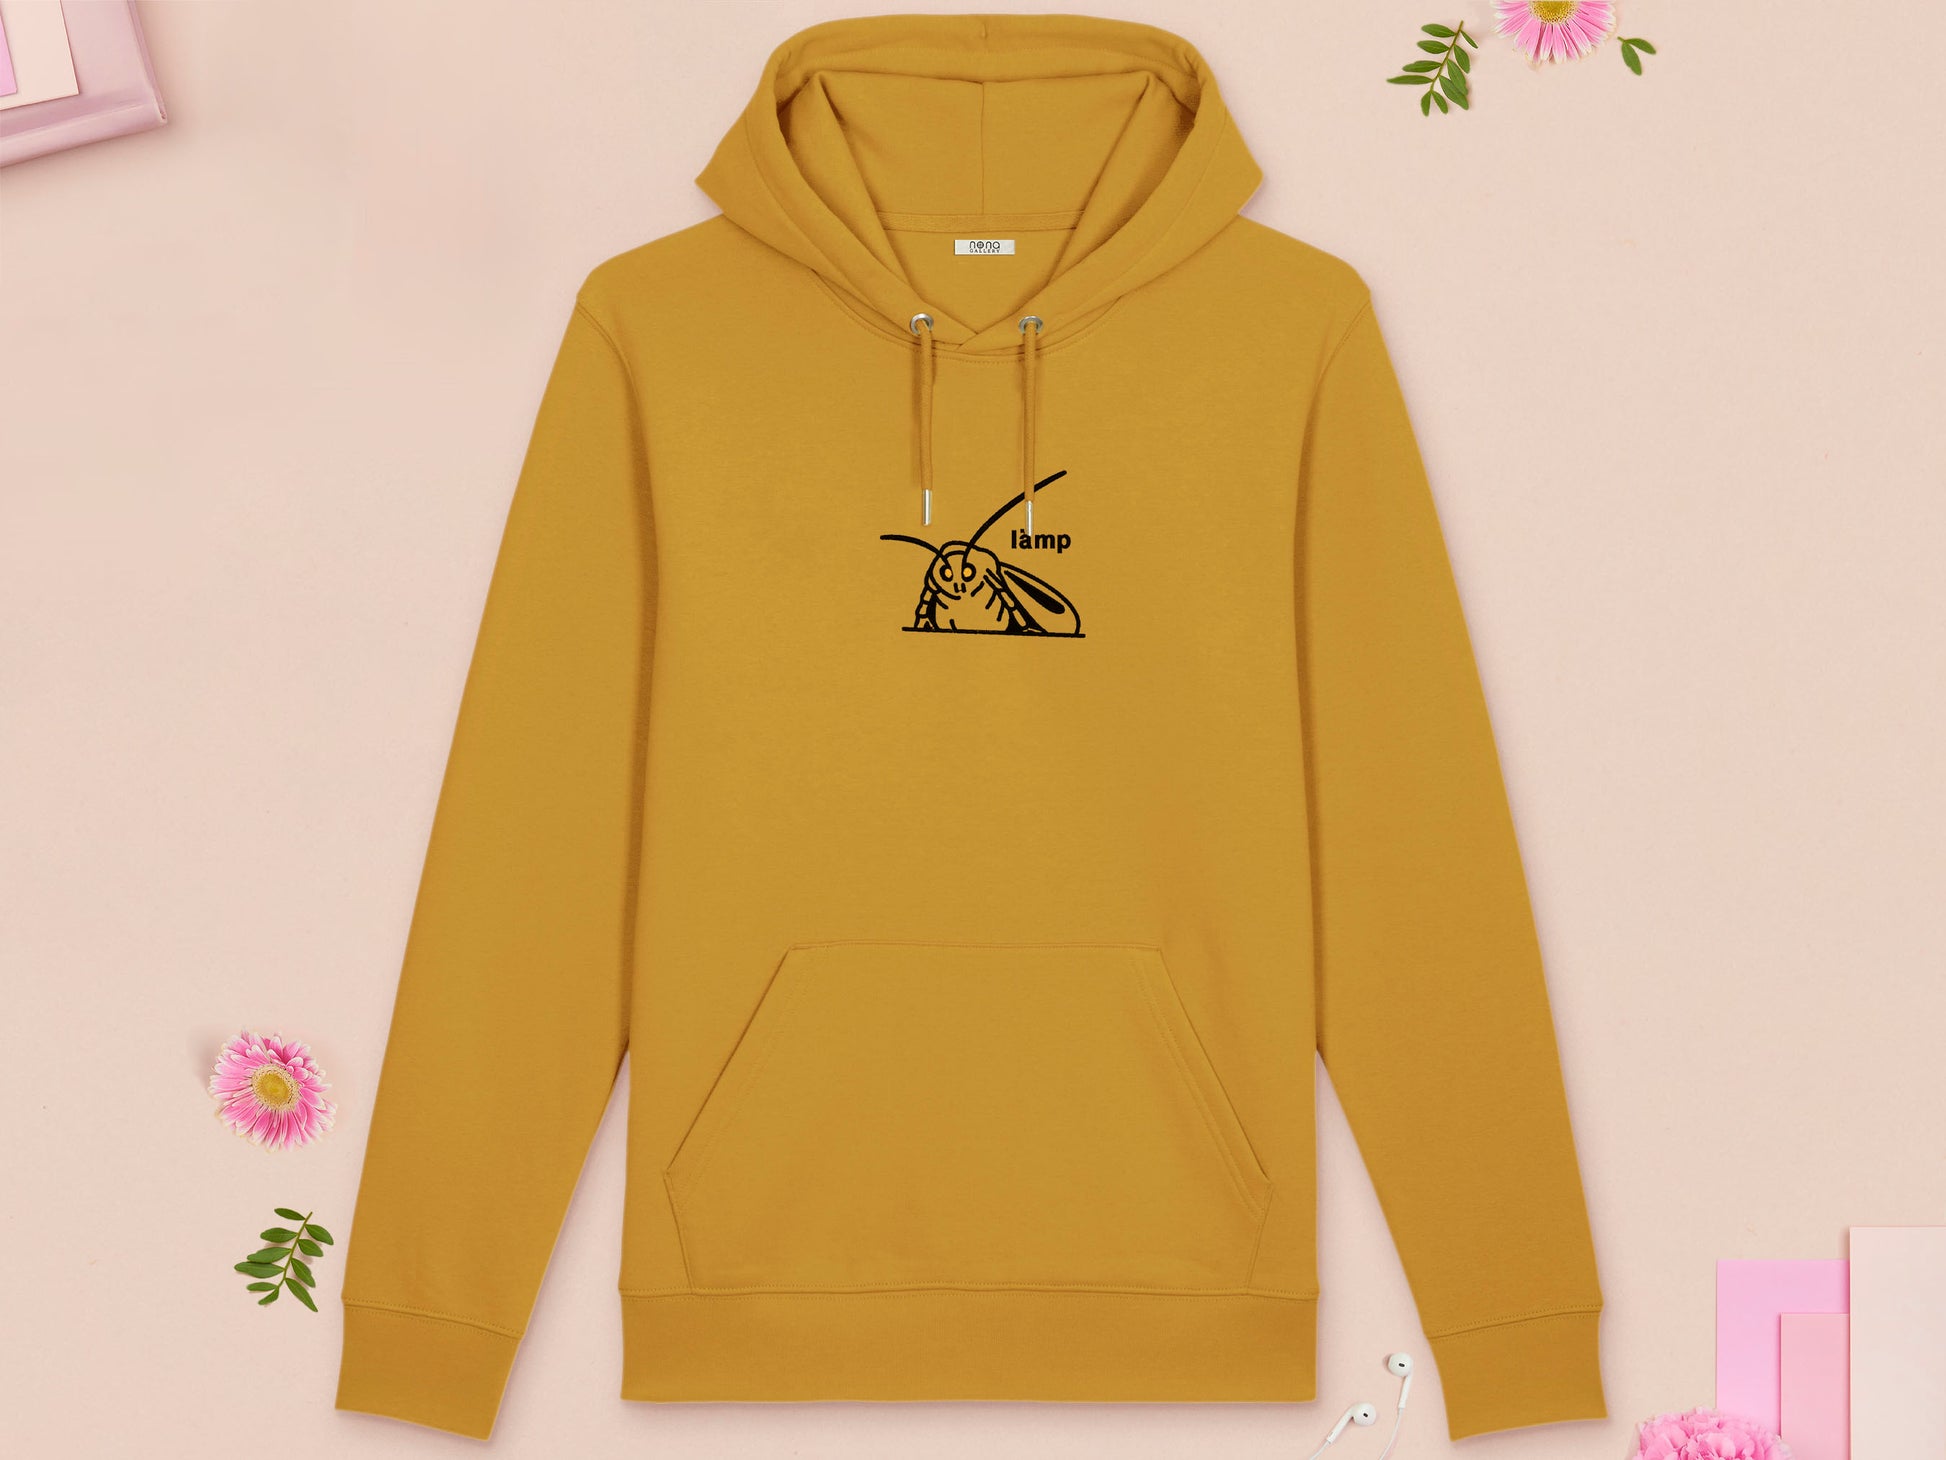 A yellow long sleeve fleece hoodie, with an embroidered black thread design of a moth with glowing yellow eyes and the word lämp